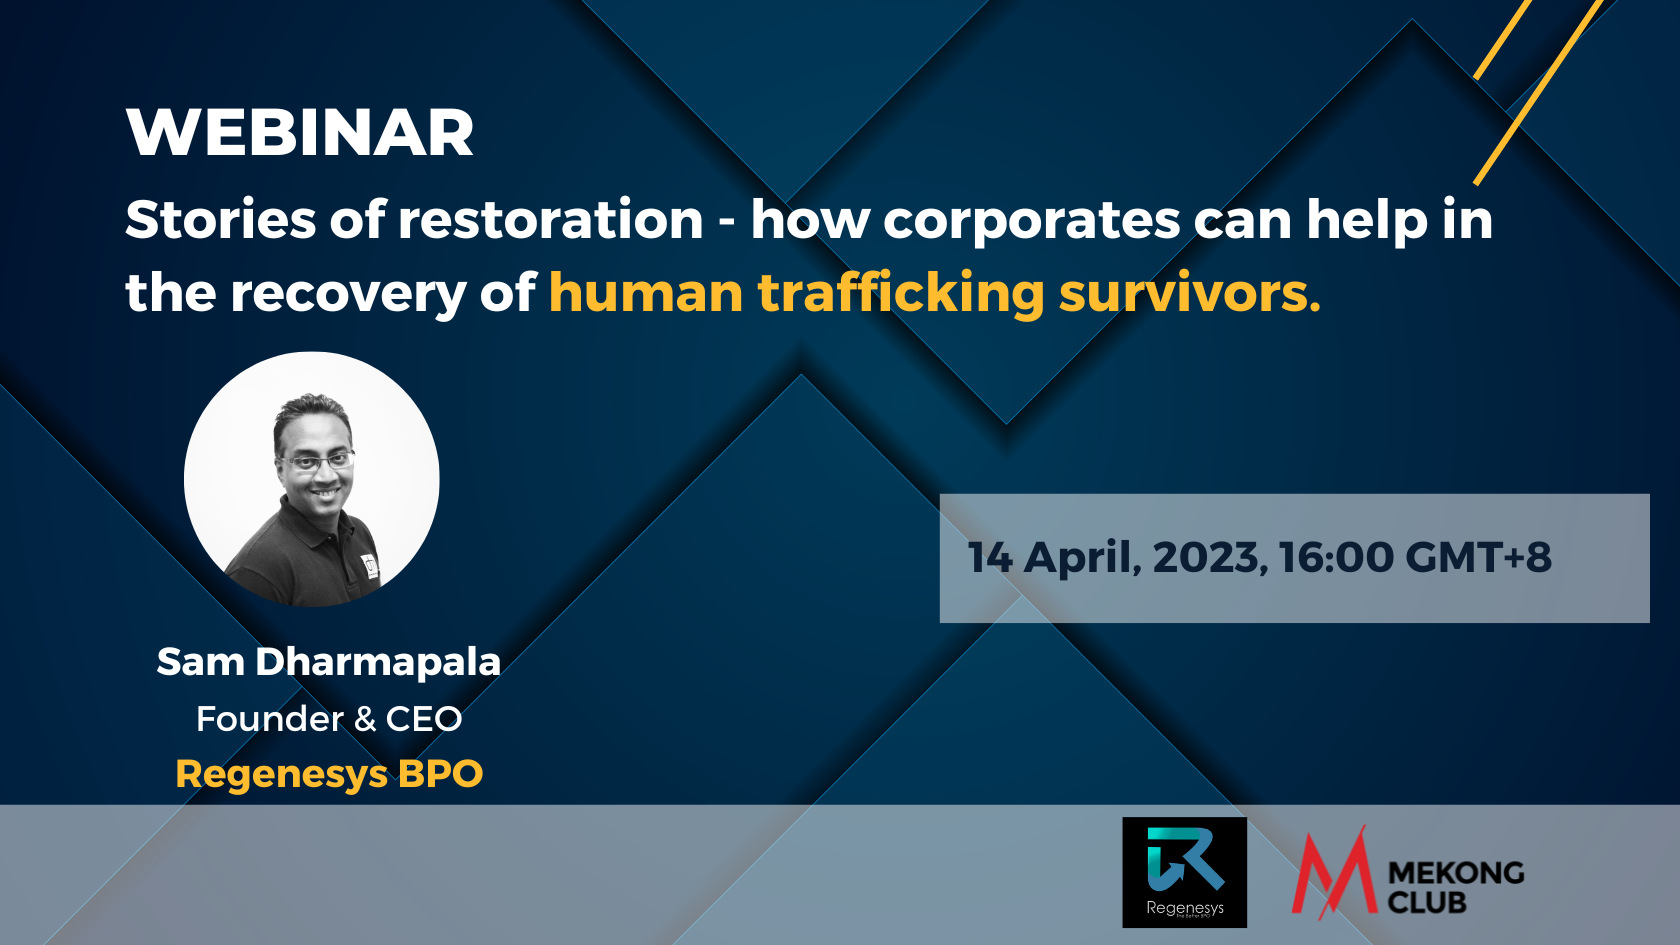 Stories of Restoration: A Webinar on Corporate Contributions to Human Trafficking Survivor Recovery